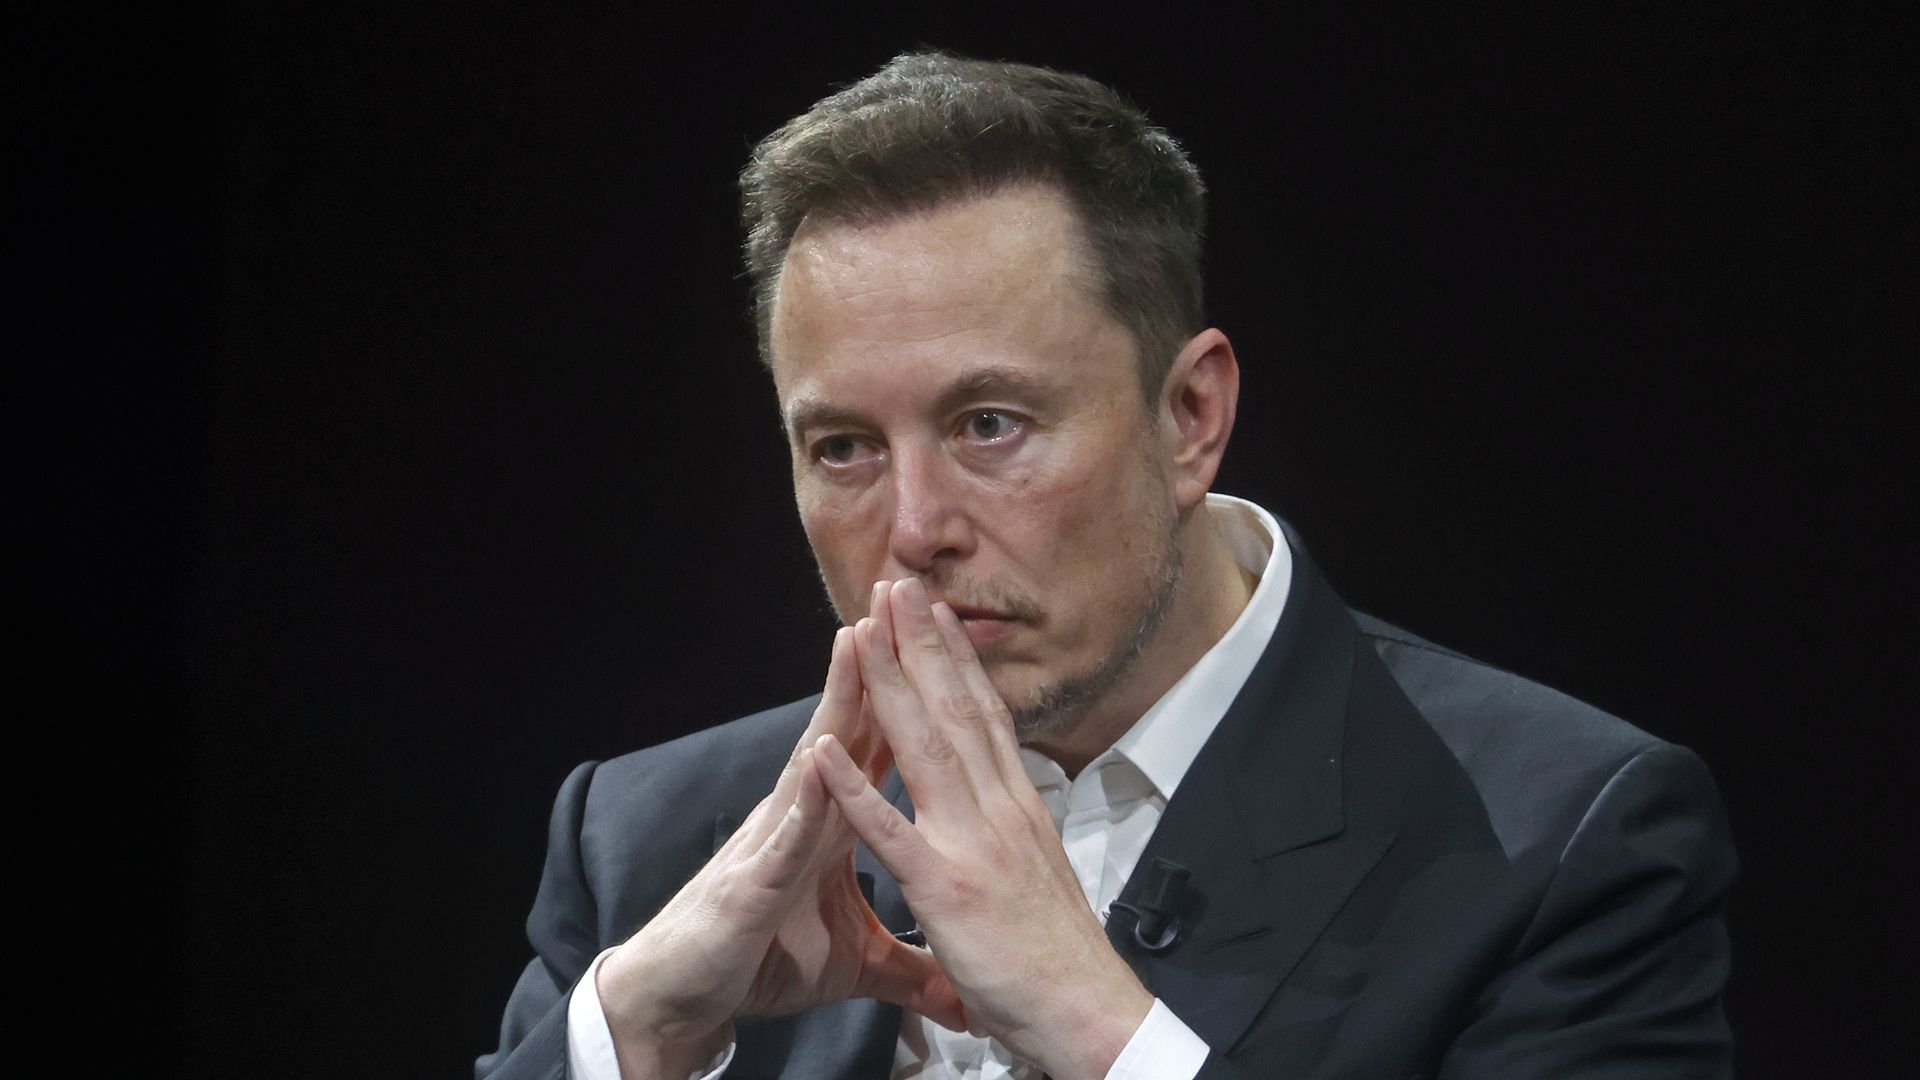 Chief Executive Officer of SpaceX and Tesla and owner of Twitter, Elon Musk attends the Viva Technology conference dedicated to innovation and startups at the Porte de Versailles exhibition centre on June 16, 2023 in Paris.